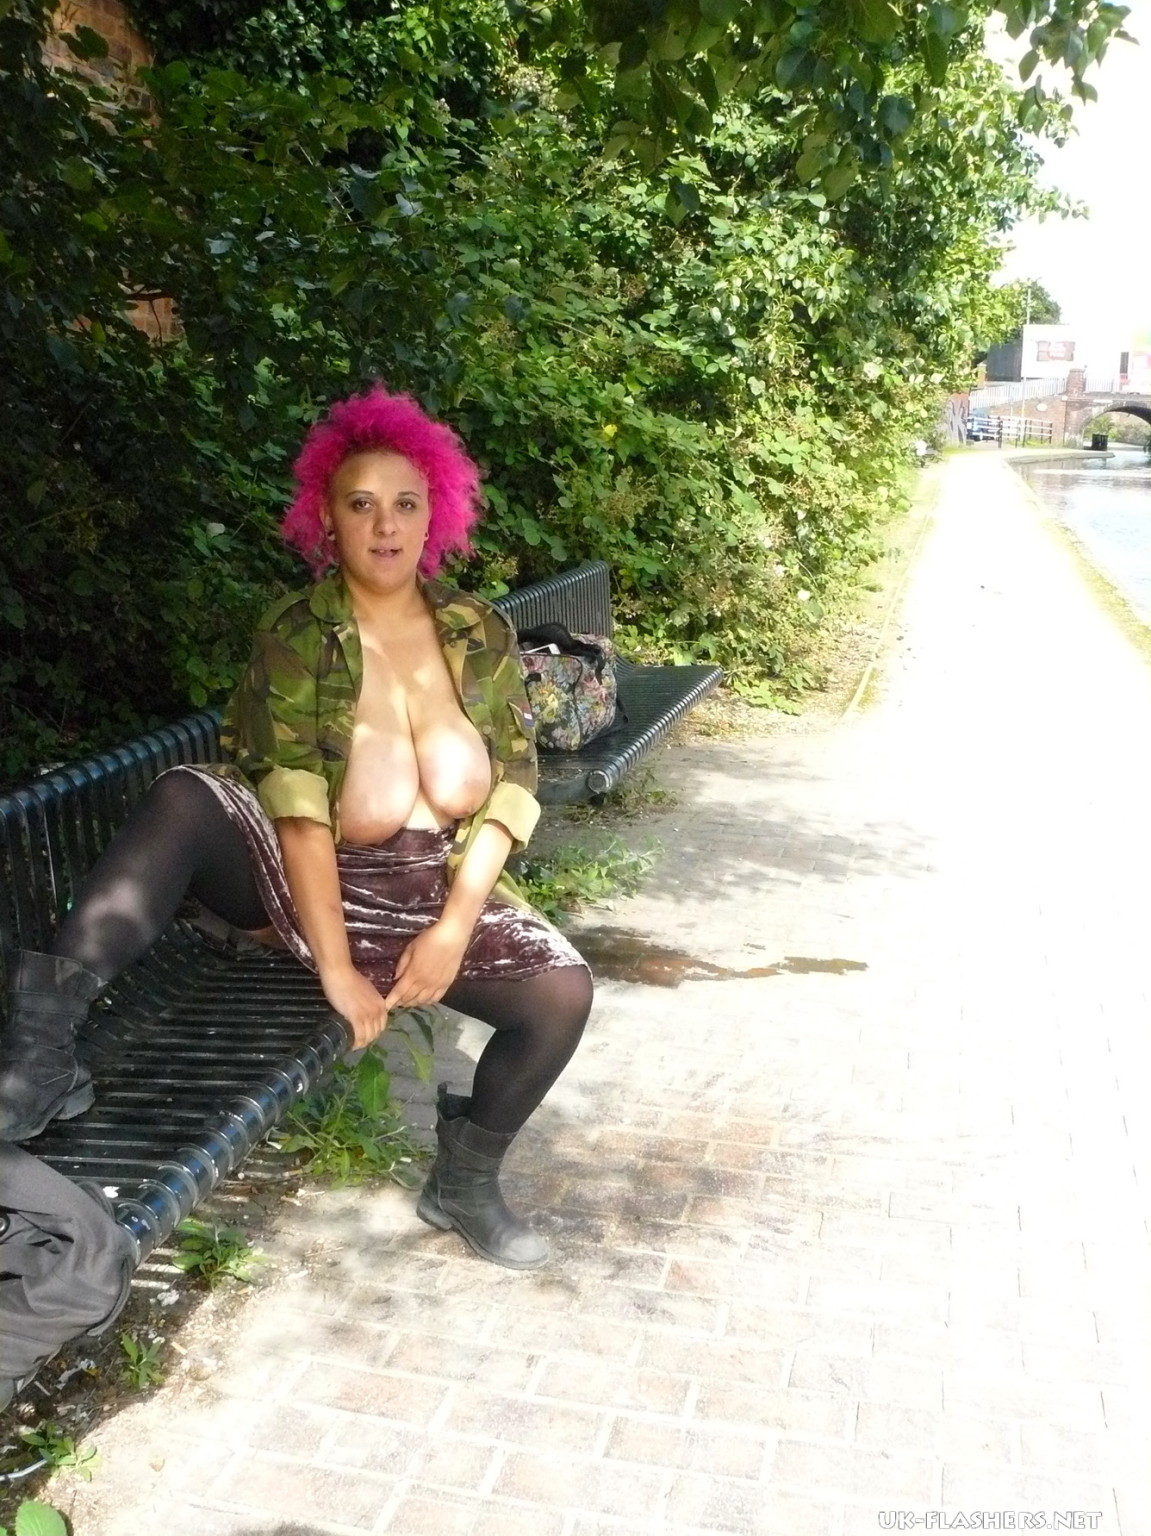 Busty flashing freak Roxys voyeur and upskirt exposure outdoors with pink haired